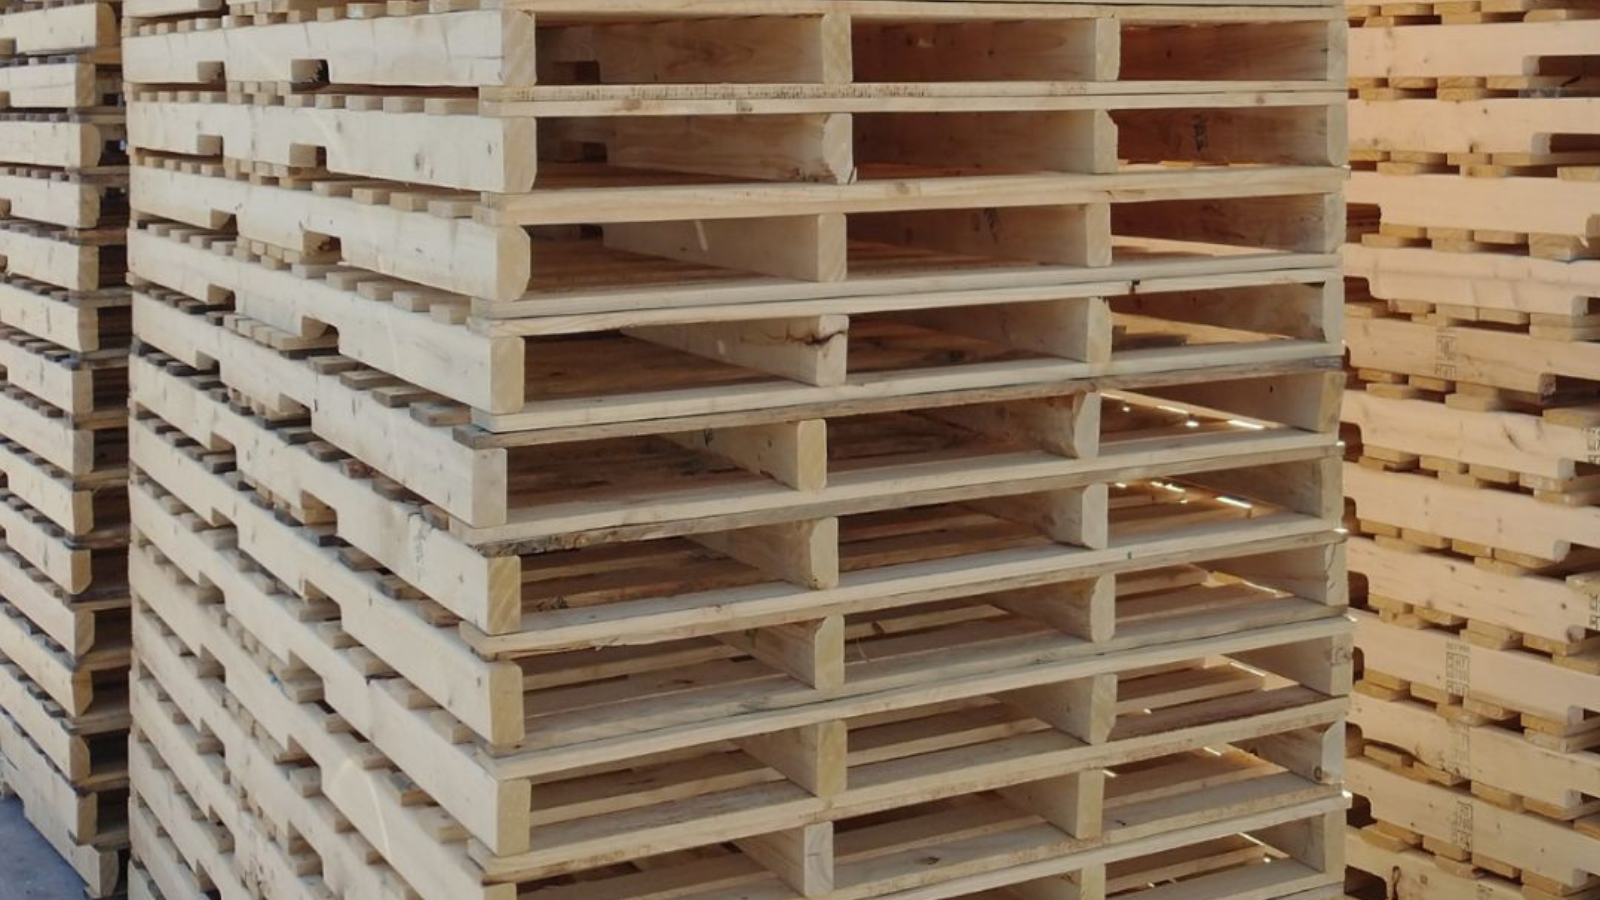 The Pallet Pro - Efficient Pallet Solutions for Winter Park Florida - New Wood Pallets Stacked